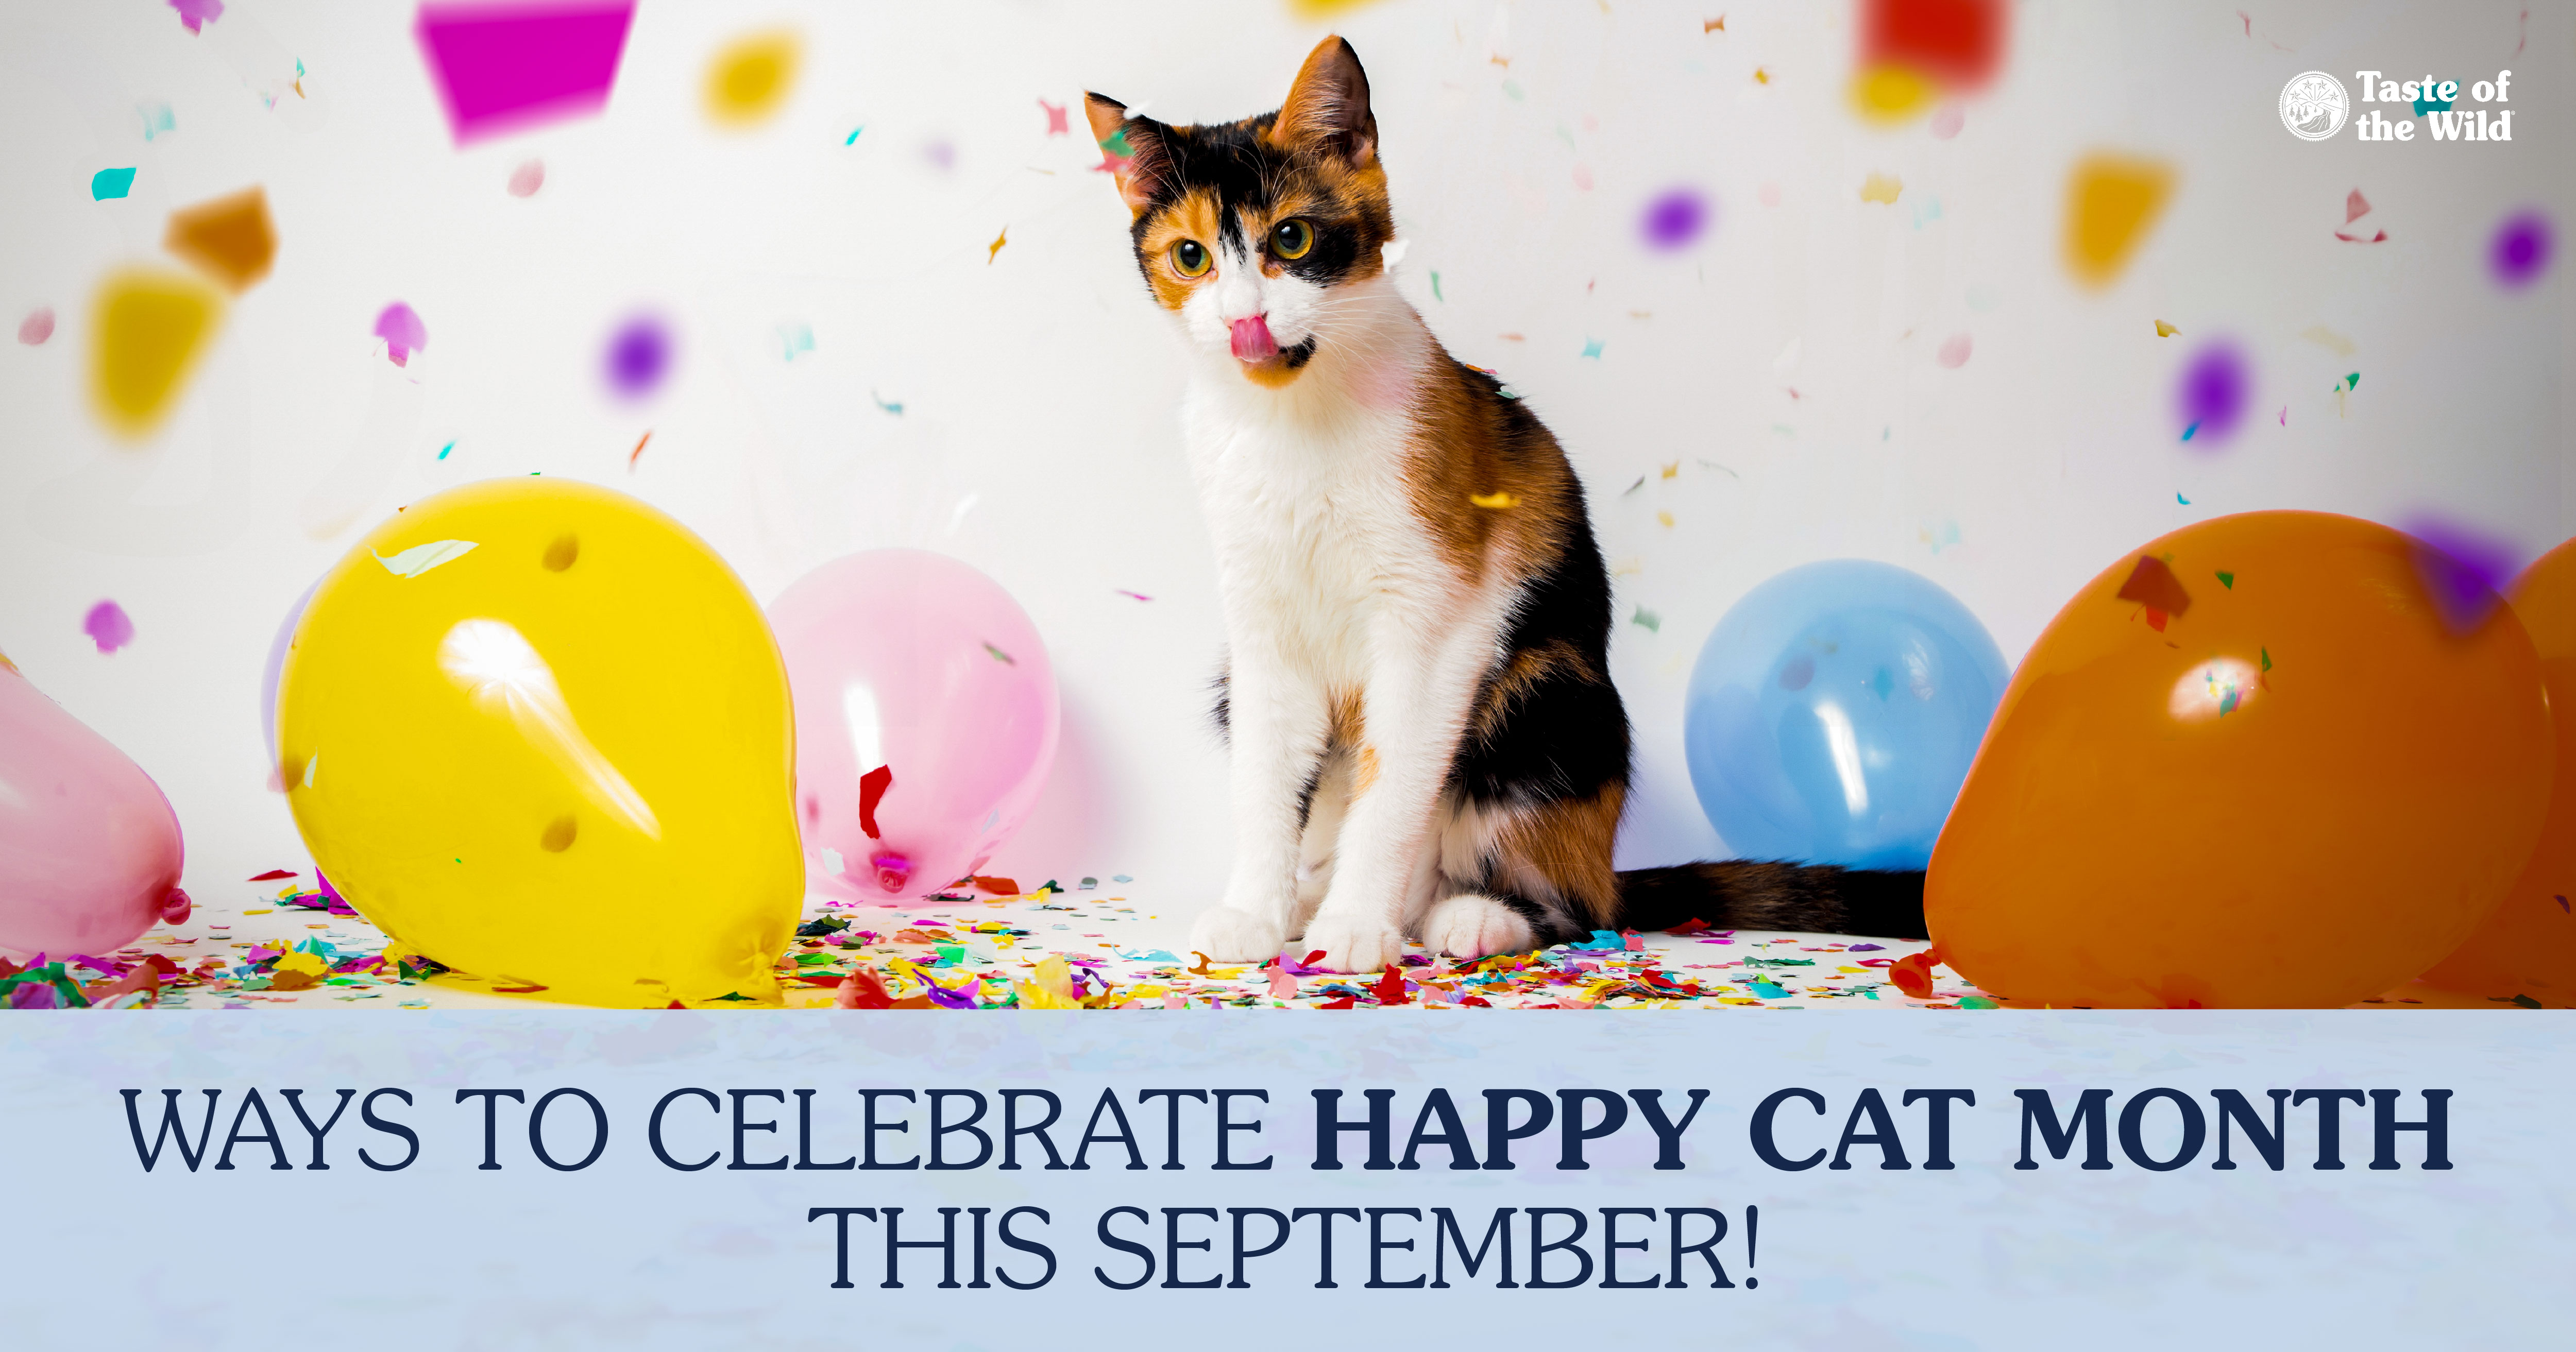 A black, white and brown cat sitting in a white room surrounded by confetti and balloons.